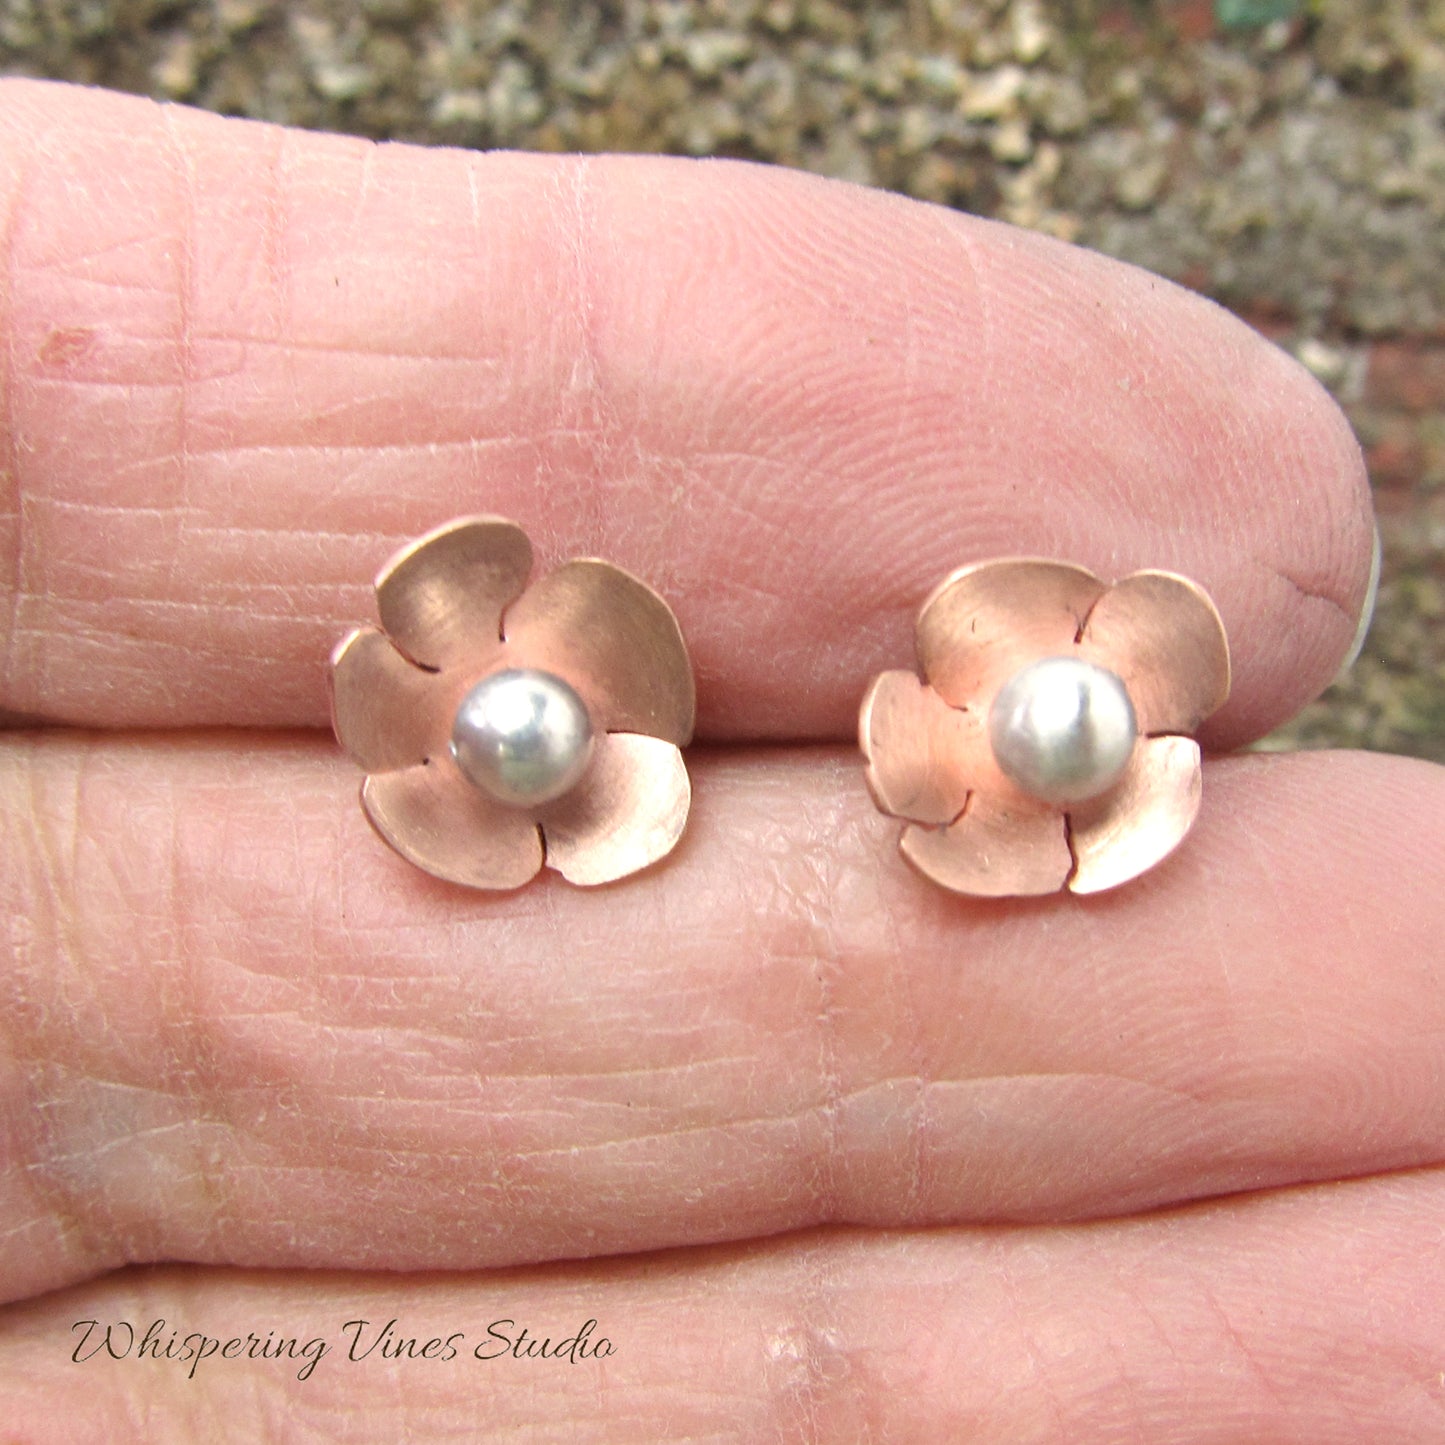 Dainty Handcrafted Copper Flower Stud Earrings with Sterling Silver Post